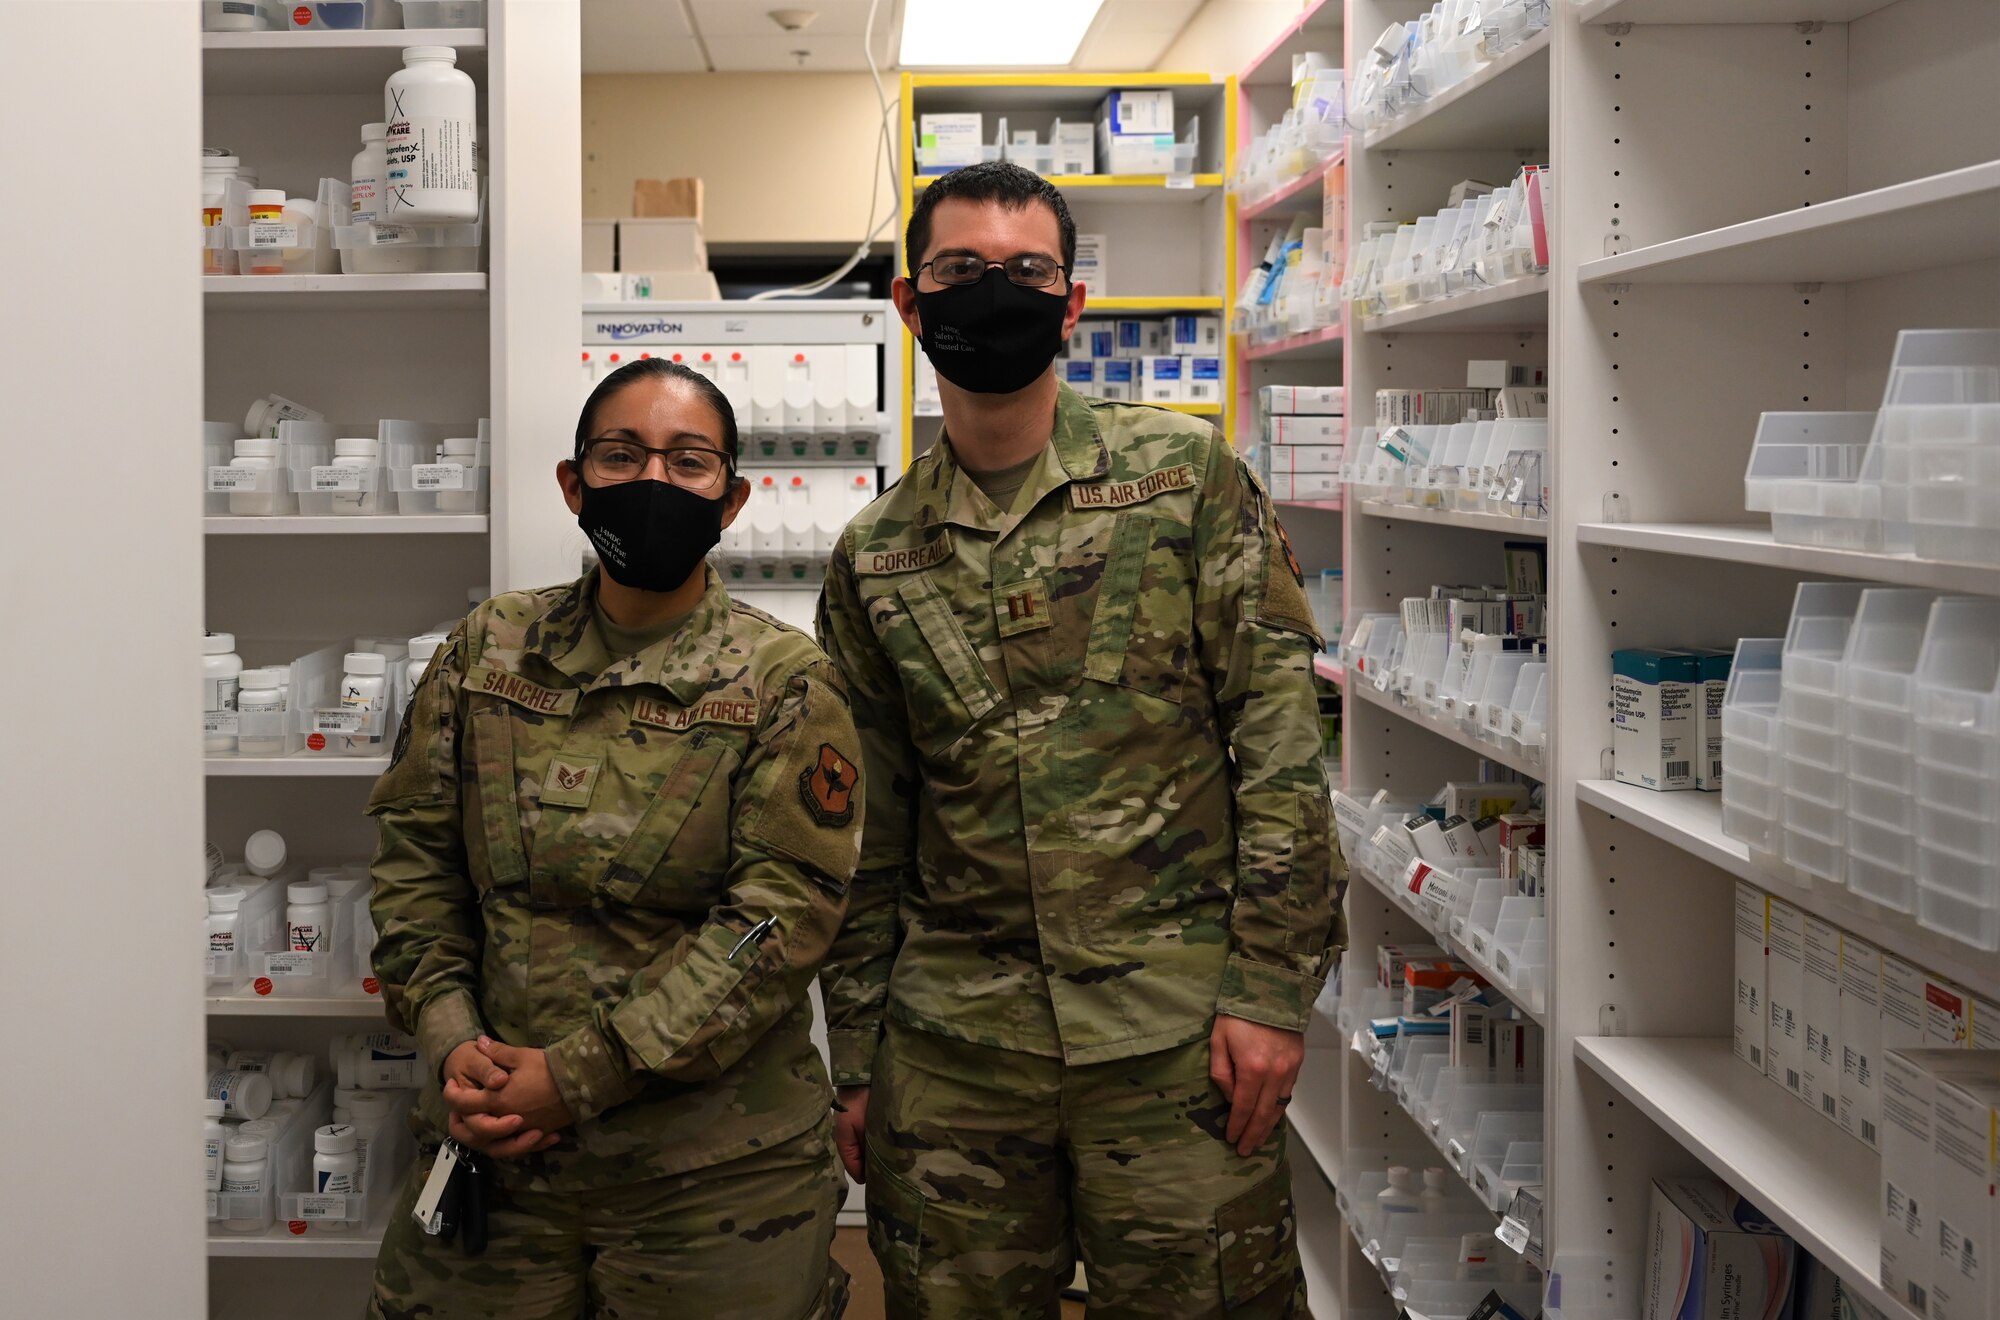 U.S. Air Force Capt. Gregory Correale, 14th Medical Group Pharmacy element chief, and Staff Sgt. Joanna Sanchez, 14th MDG non-commissioned officer in charge of pharmacy services,  pose for a photo in the pharmacy, Nov. 3, 2021, on Columbus Air Force Base, Miss. Both members from the 14th Medical Group were selected to present posters comprised of analytics for pharmacy operations at the virtual National Pharmacy Conference, Oct. 24-26, 2021. (U.S. Air Force photo by Airman 1st Class Jessica Haynie)